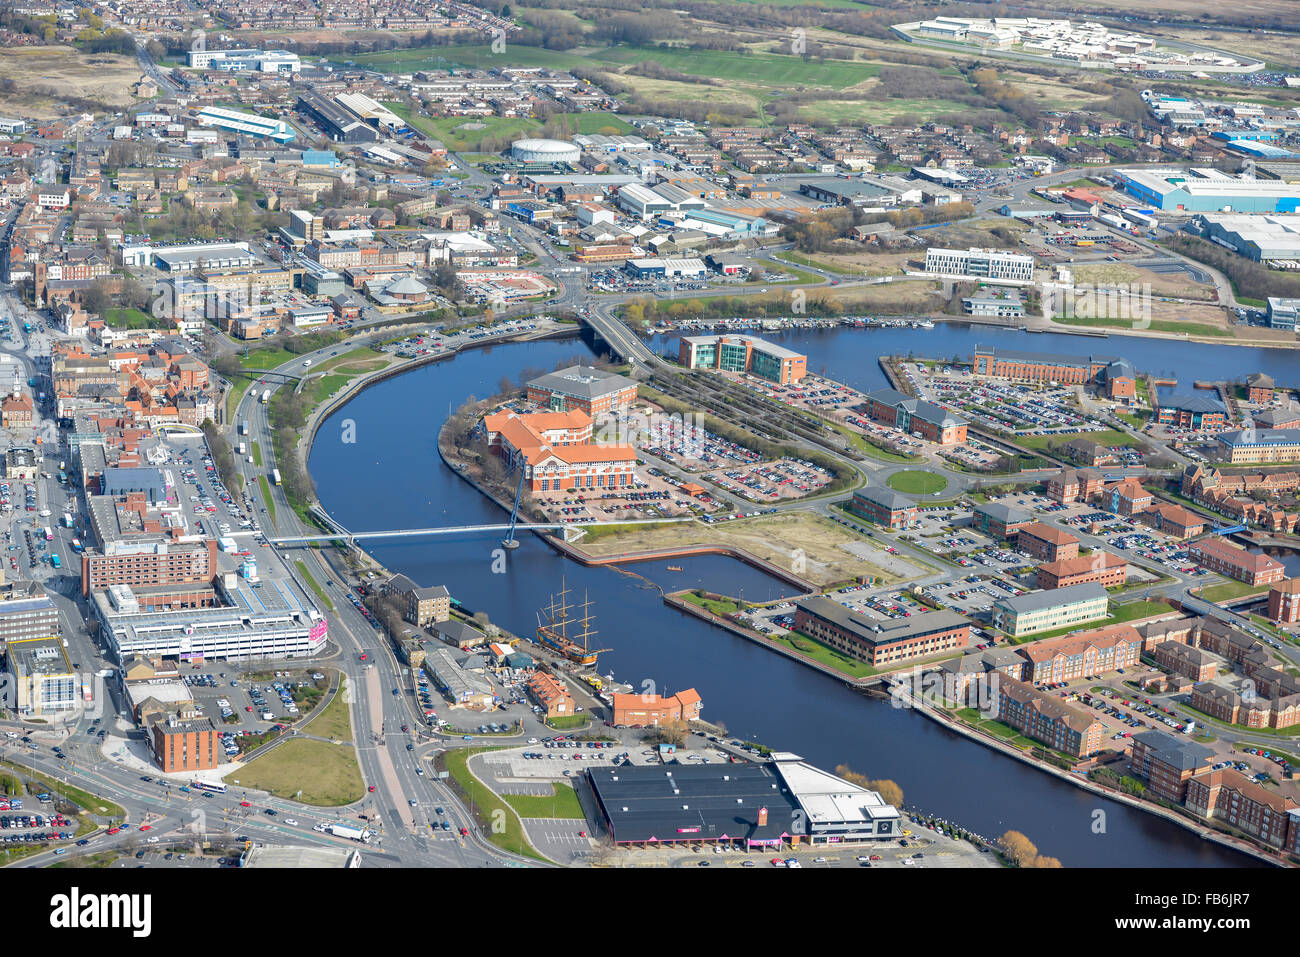 An aerial view of the centre of Stockton on Tees with the new North Shore development visible Stock Photo